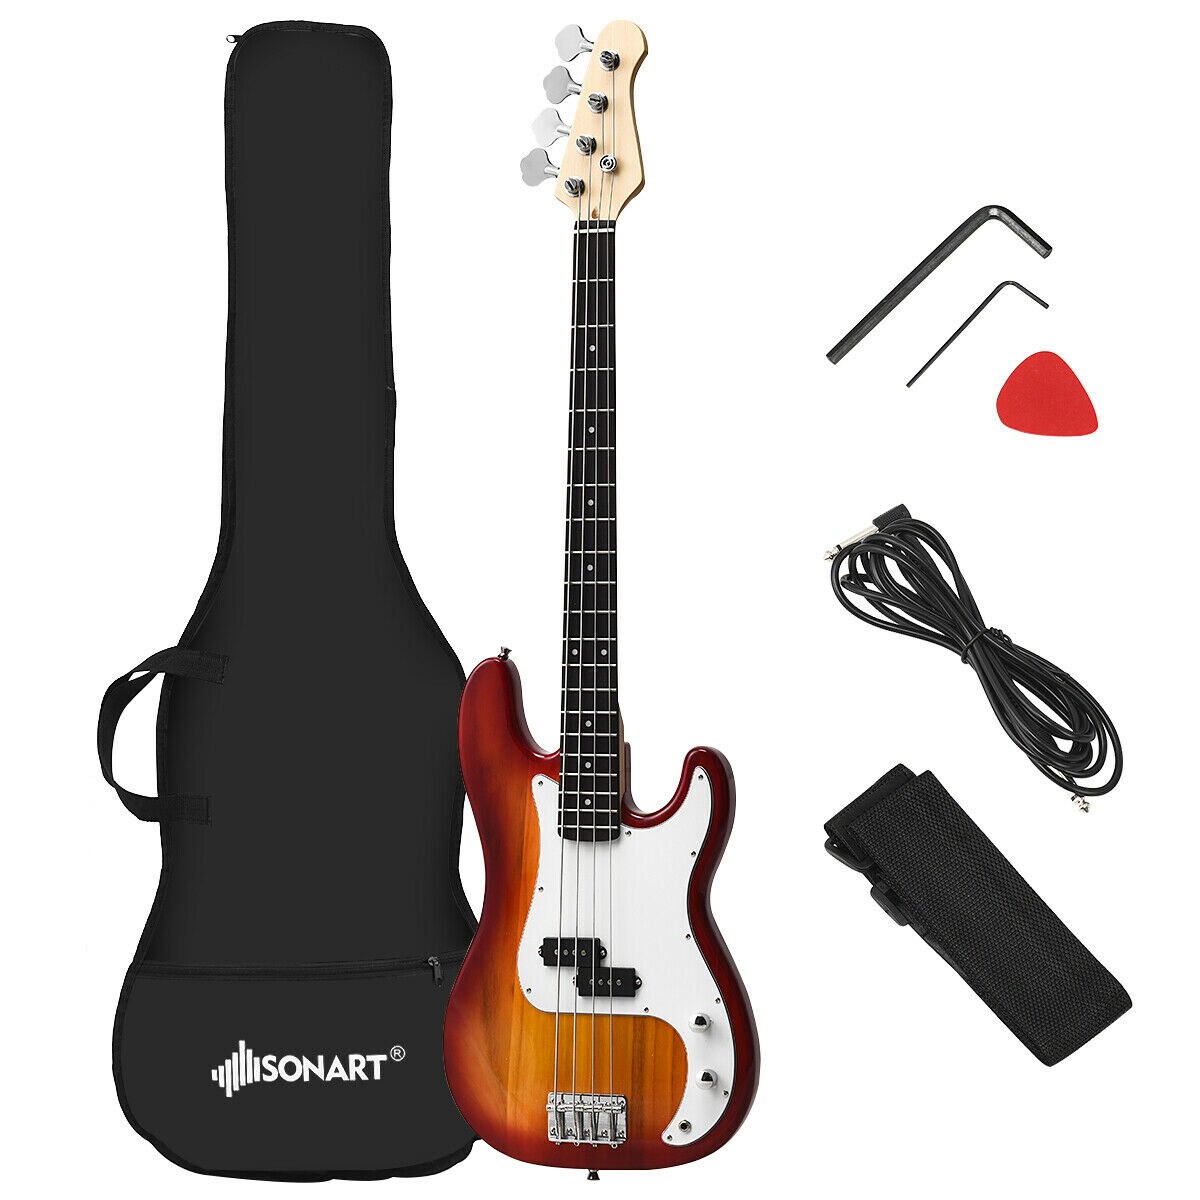 Gymax Full Size Electric Bass Guitar 4 String with Strap Guitar Bag Amp Cord Red